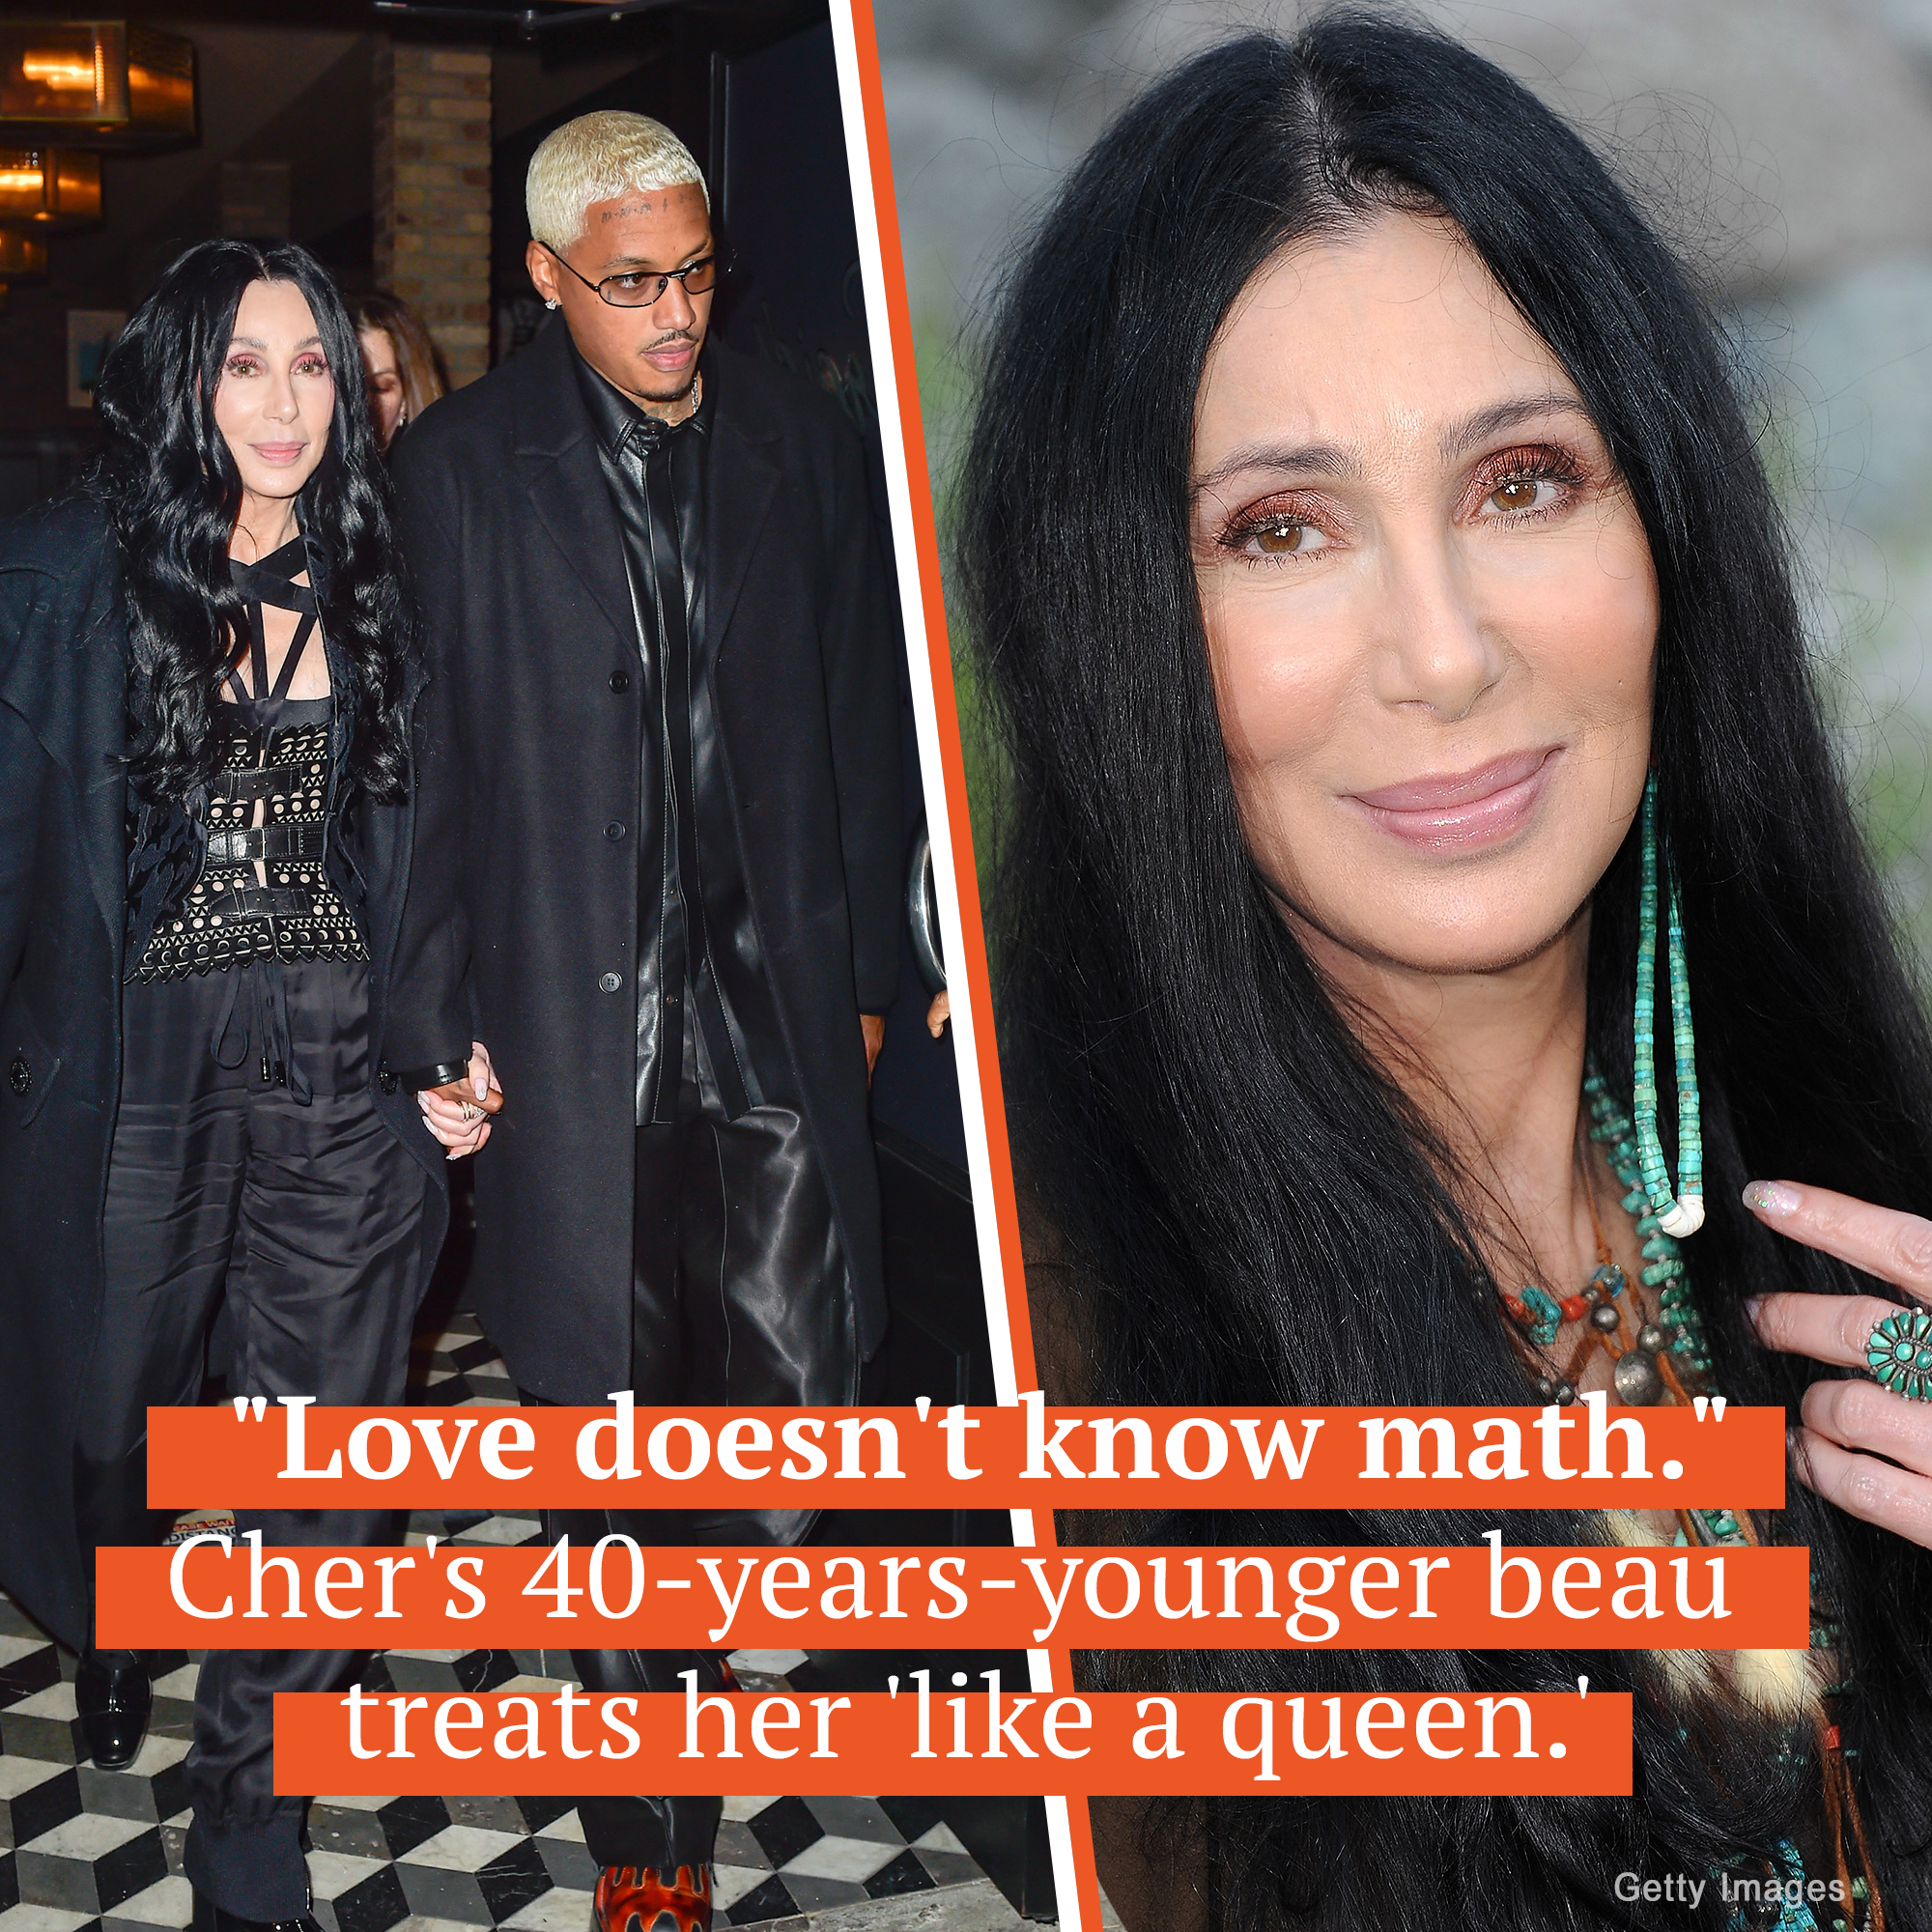 Cher deserves happiness after years of loneliness. She admits her new relationship might seem “kind of ridiculous” but confirmed that they “get along great.”